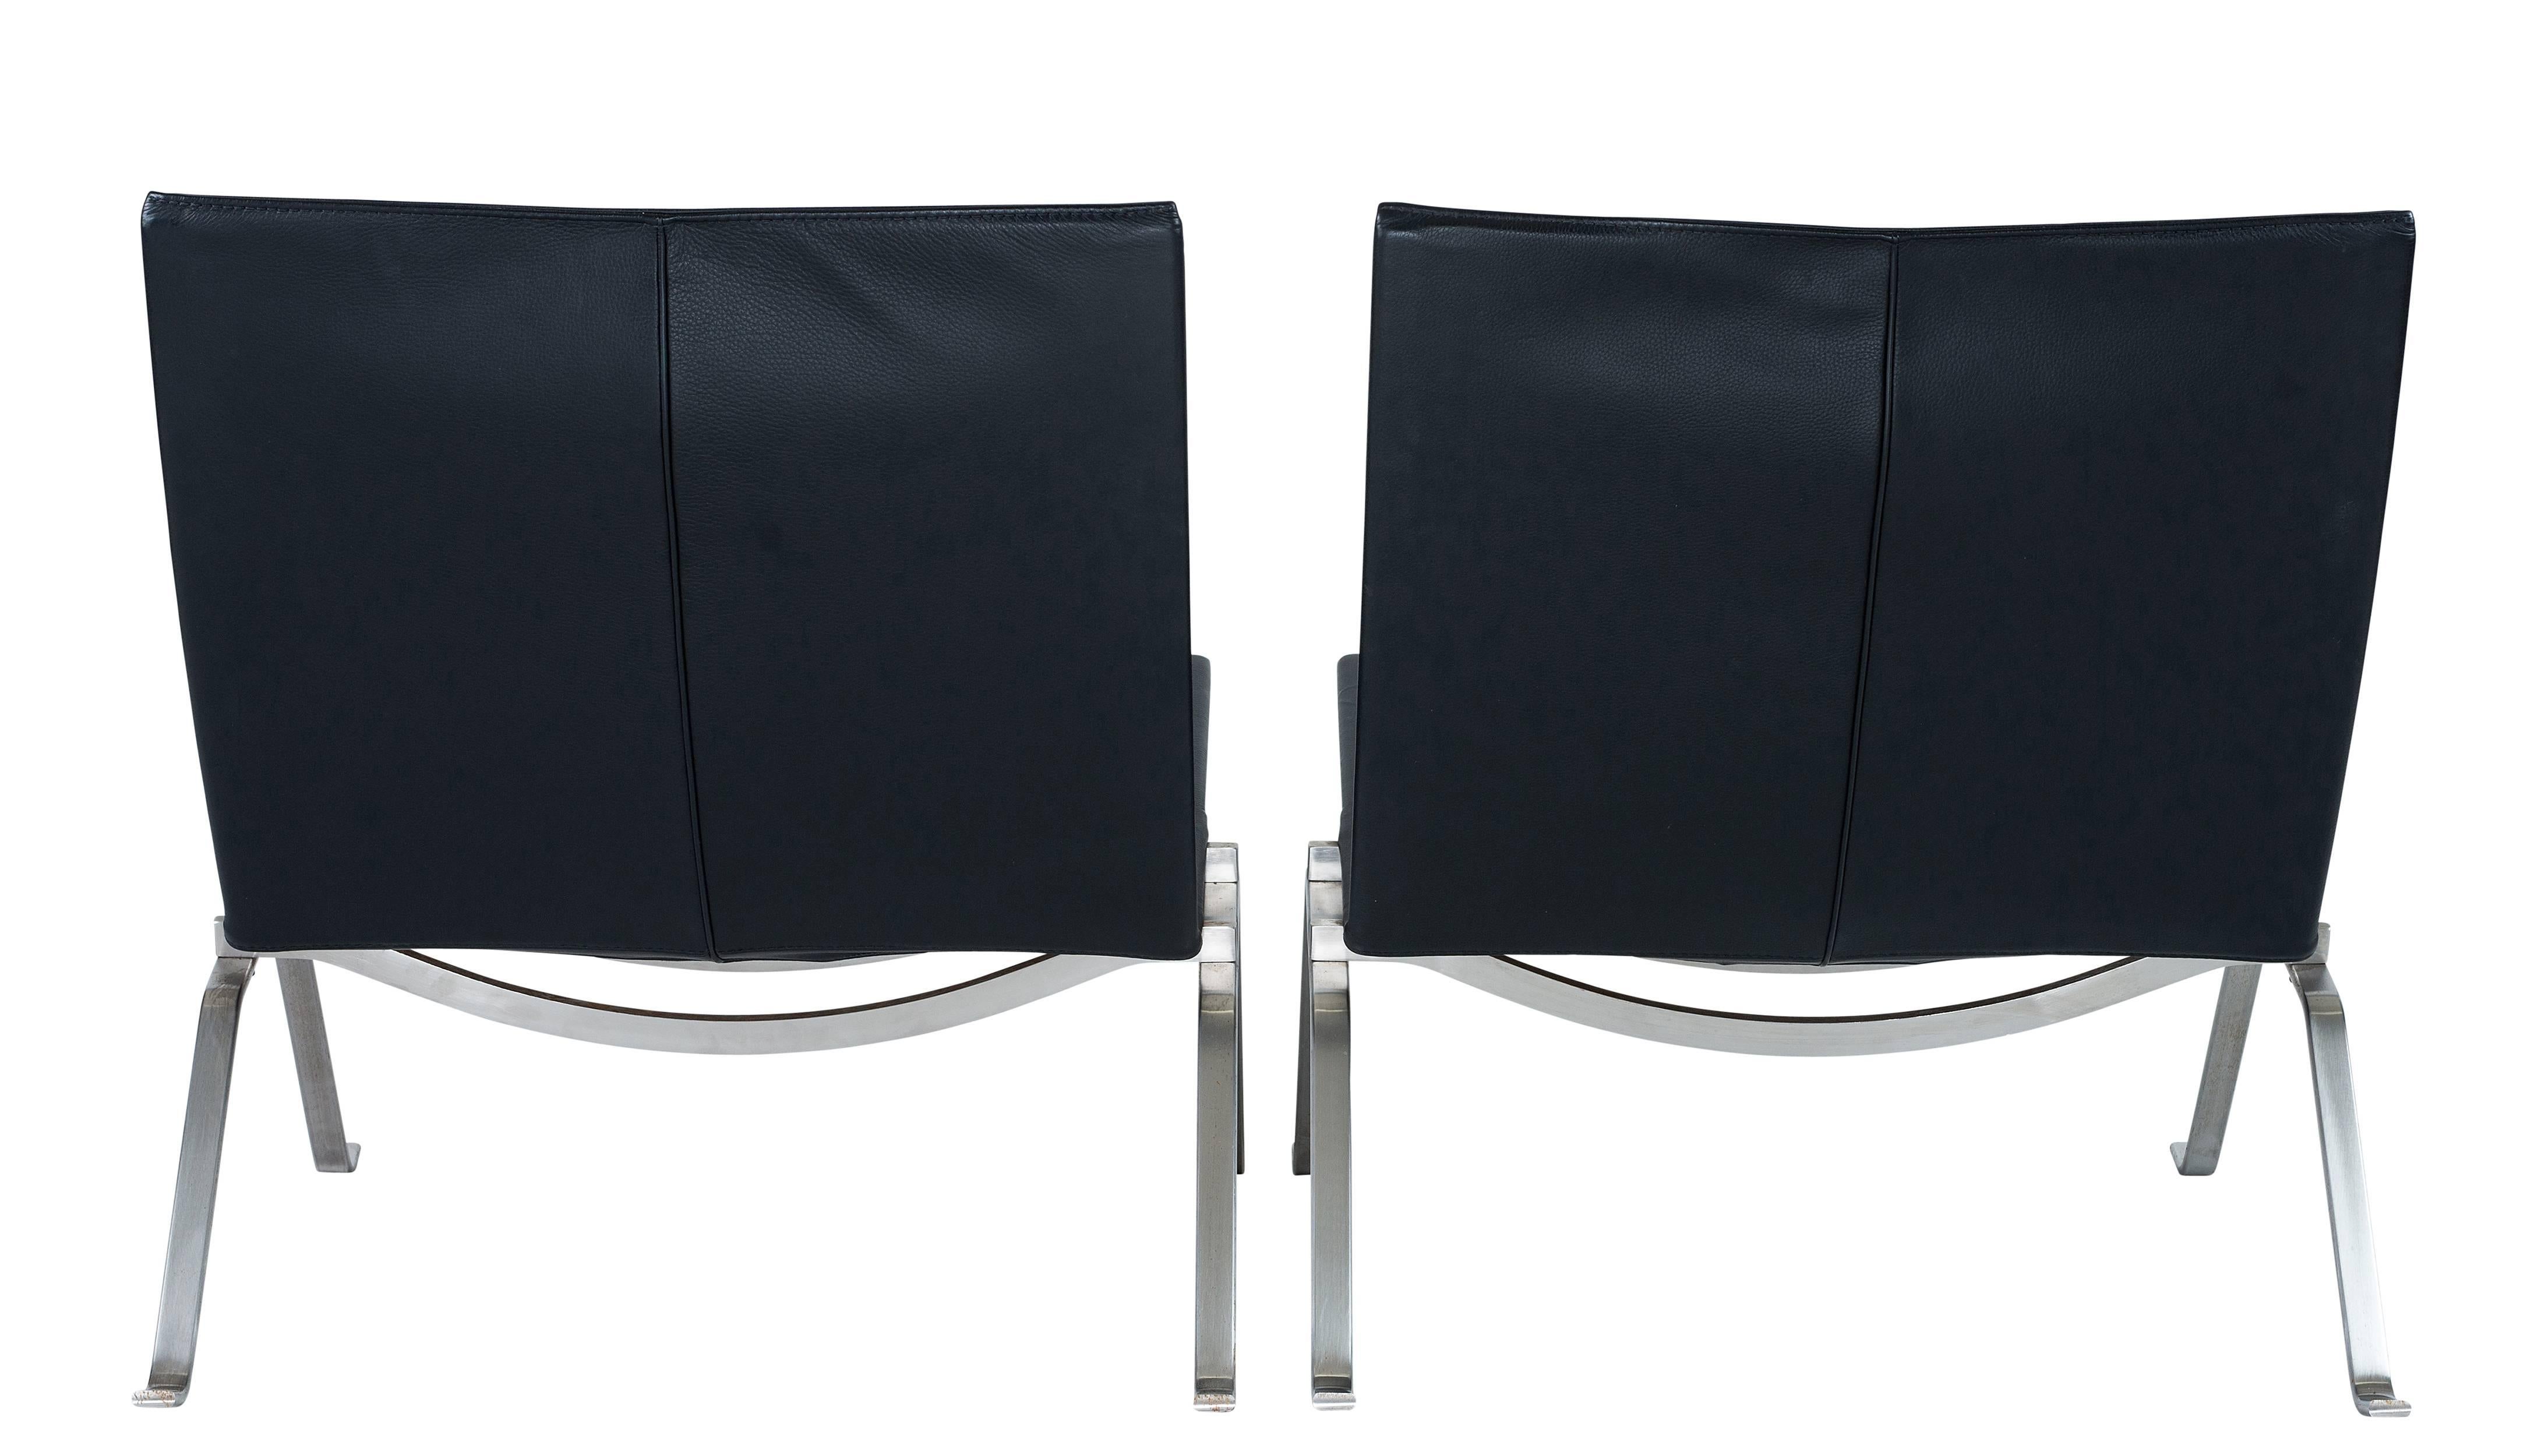 Pair of Poul Kjaerholm PK 22 lounge chairs designed in 1956 and produced by Fritz Hansen in 2007.